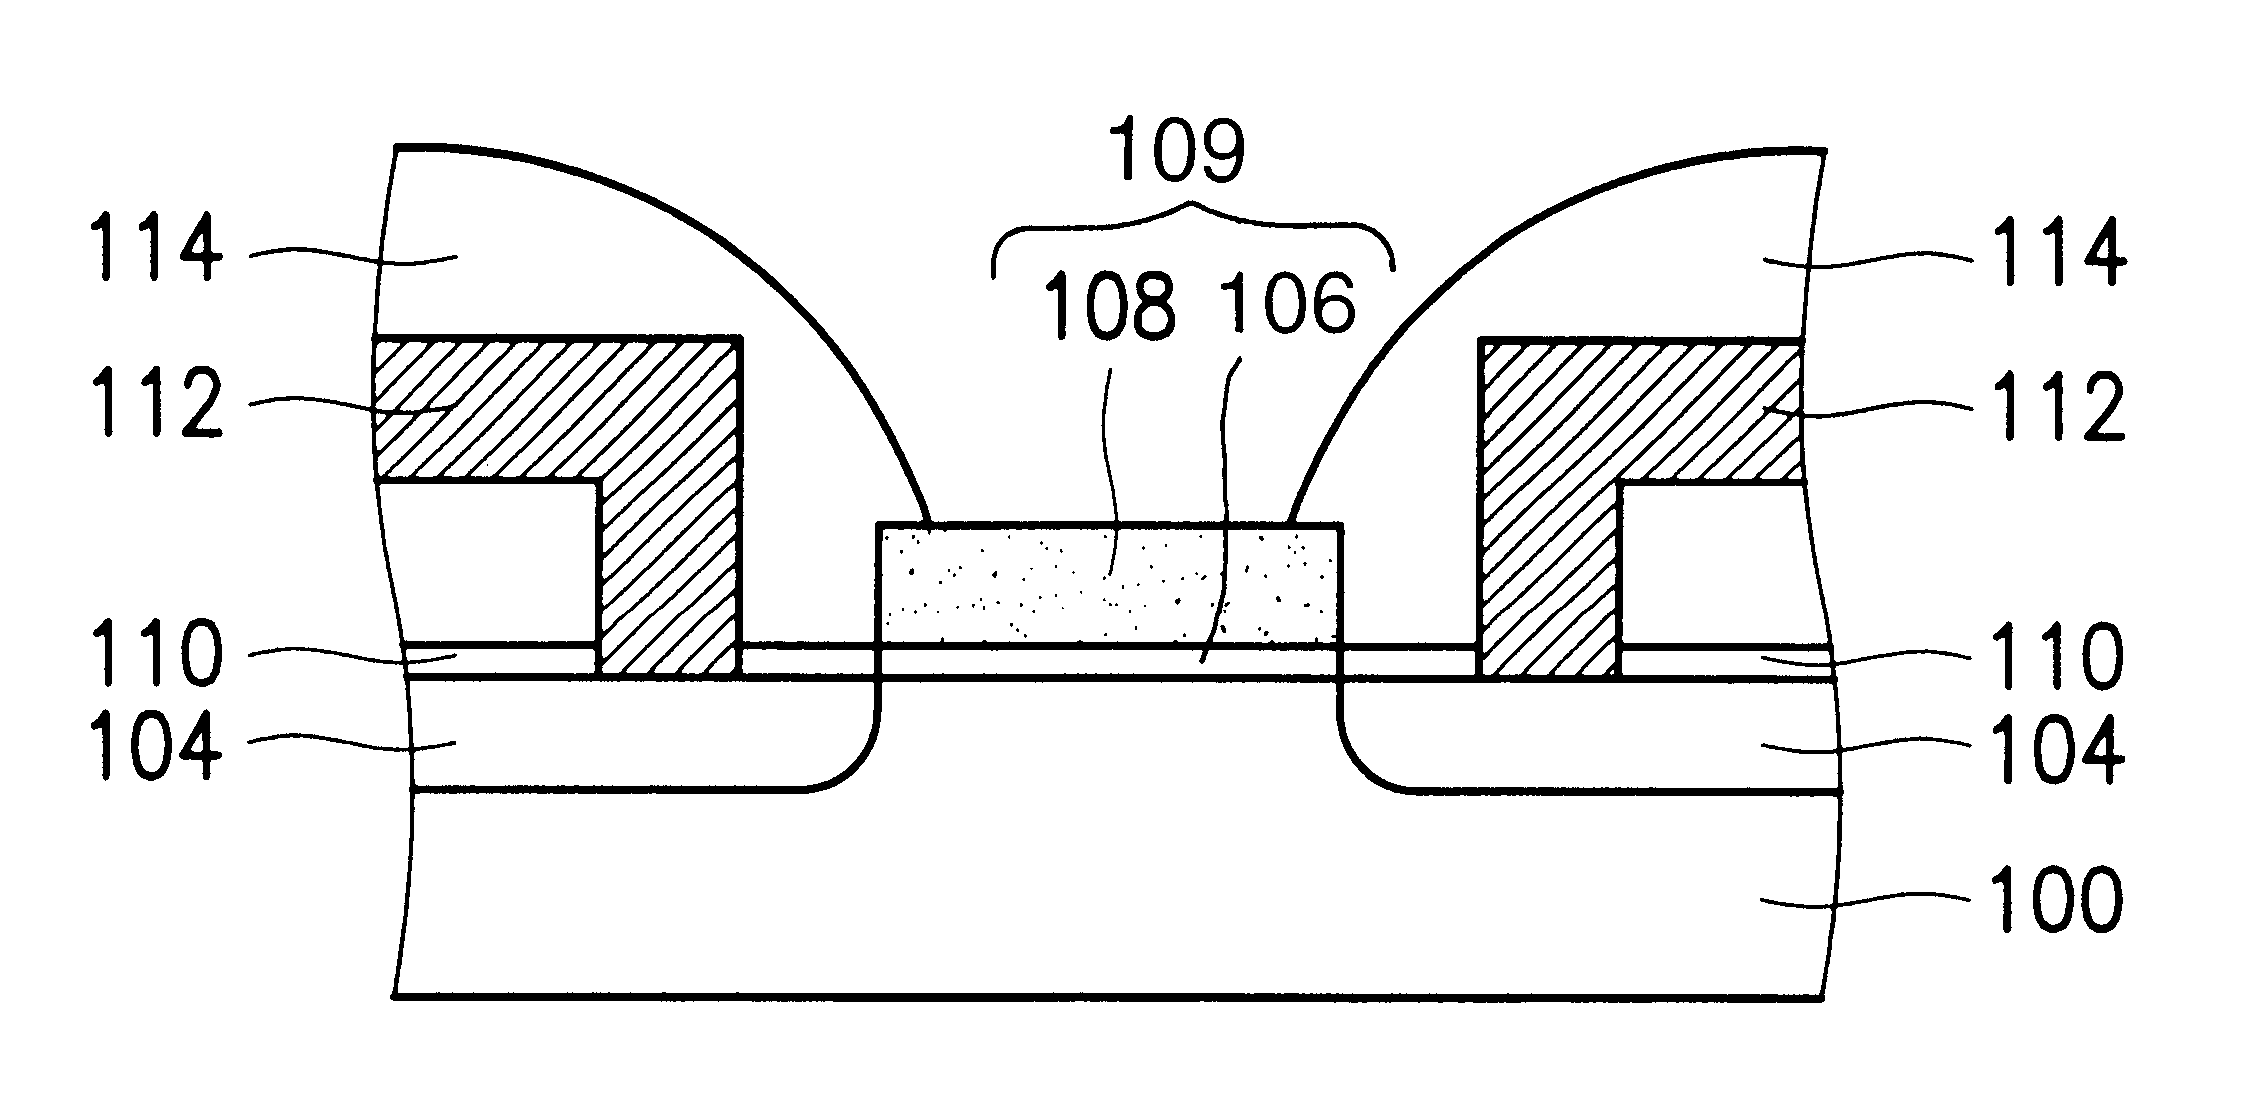 A-WO3-gate ISFET devices and method of making the same